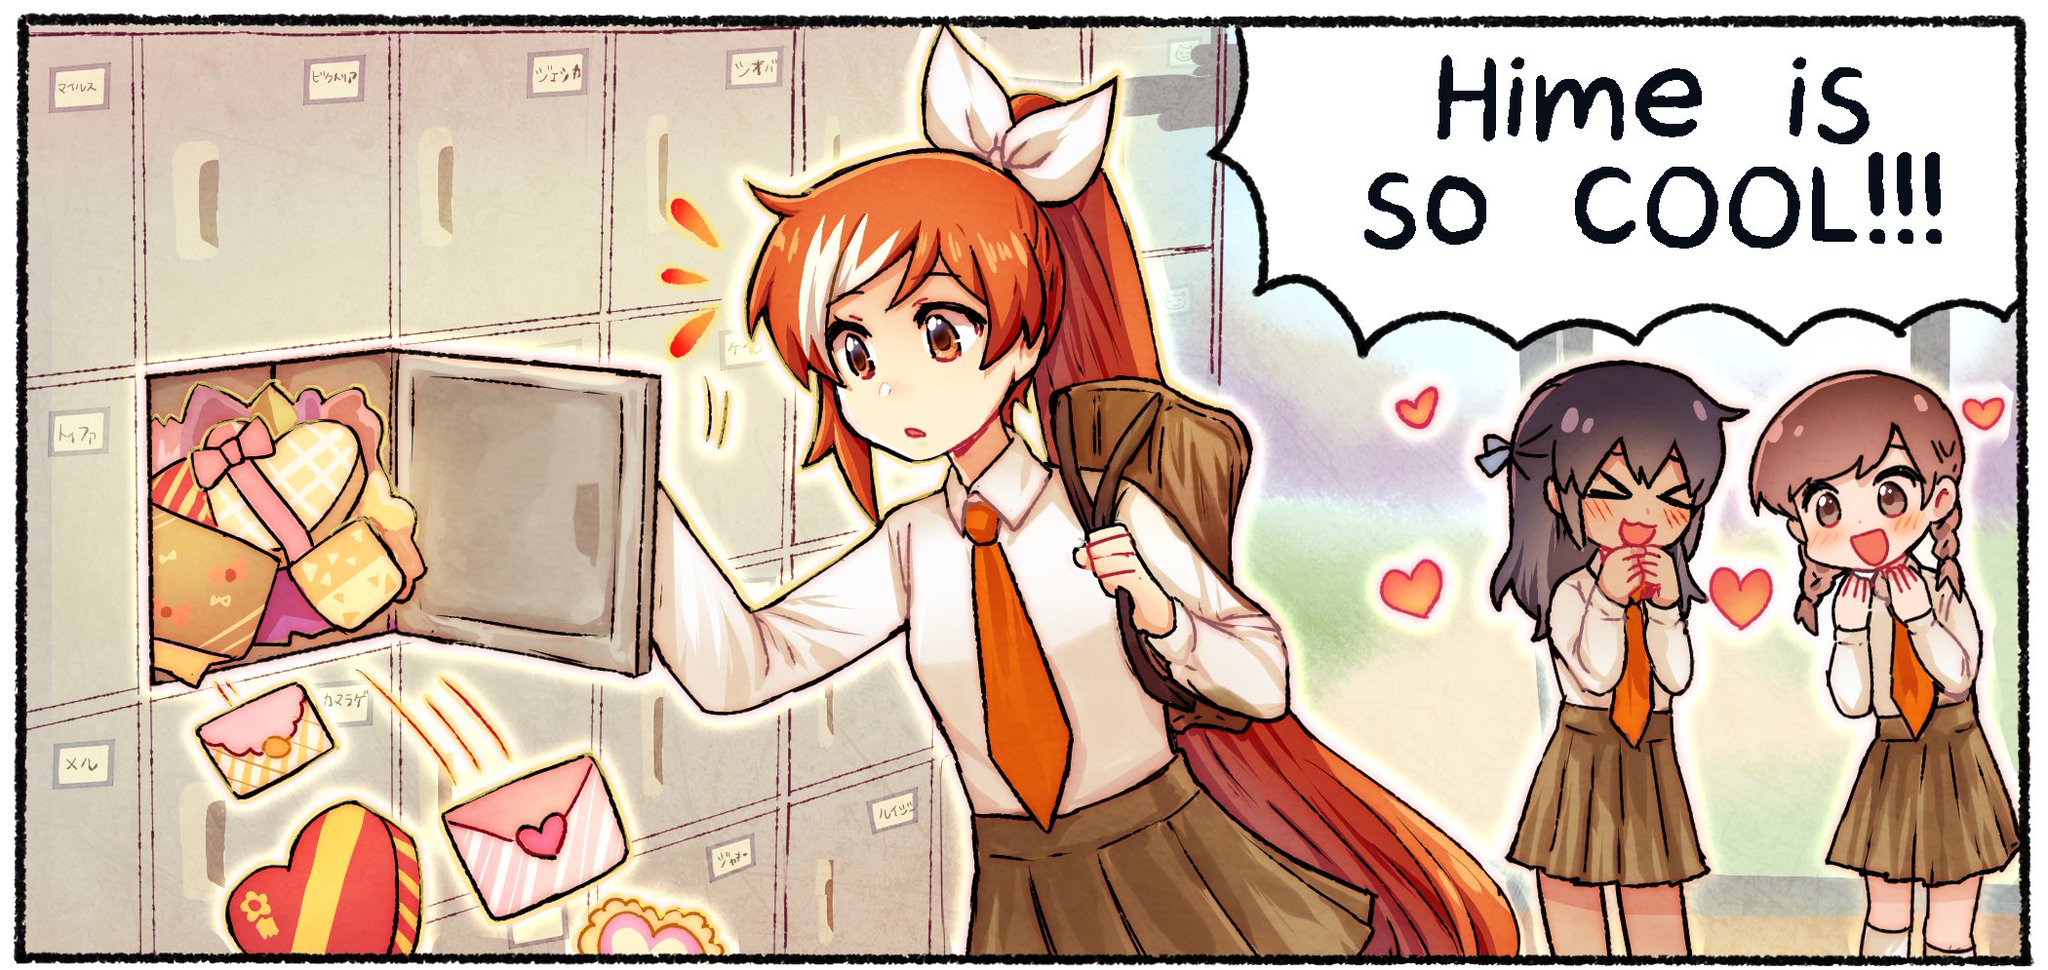 FAW Fantasy Anime Wrestling - In this special 💖 VALENTINE'S DAY 💖 edition  of The Daily Life of Crunchyroll-Hime (by @coughdrops!!) 💕 Hime's secret  admirer has a message!